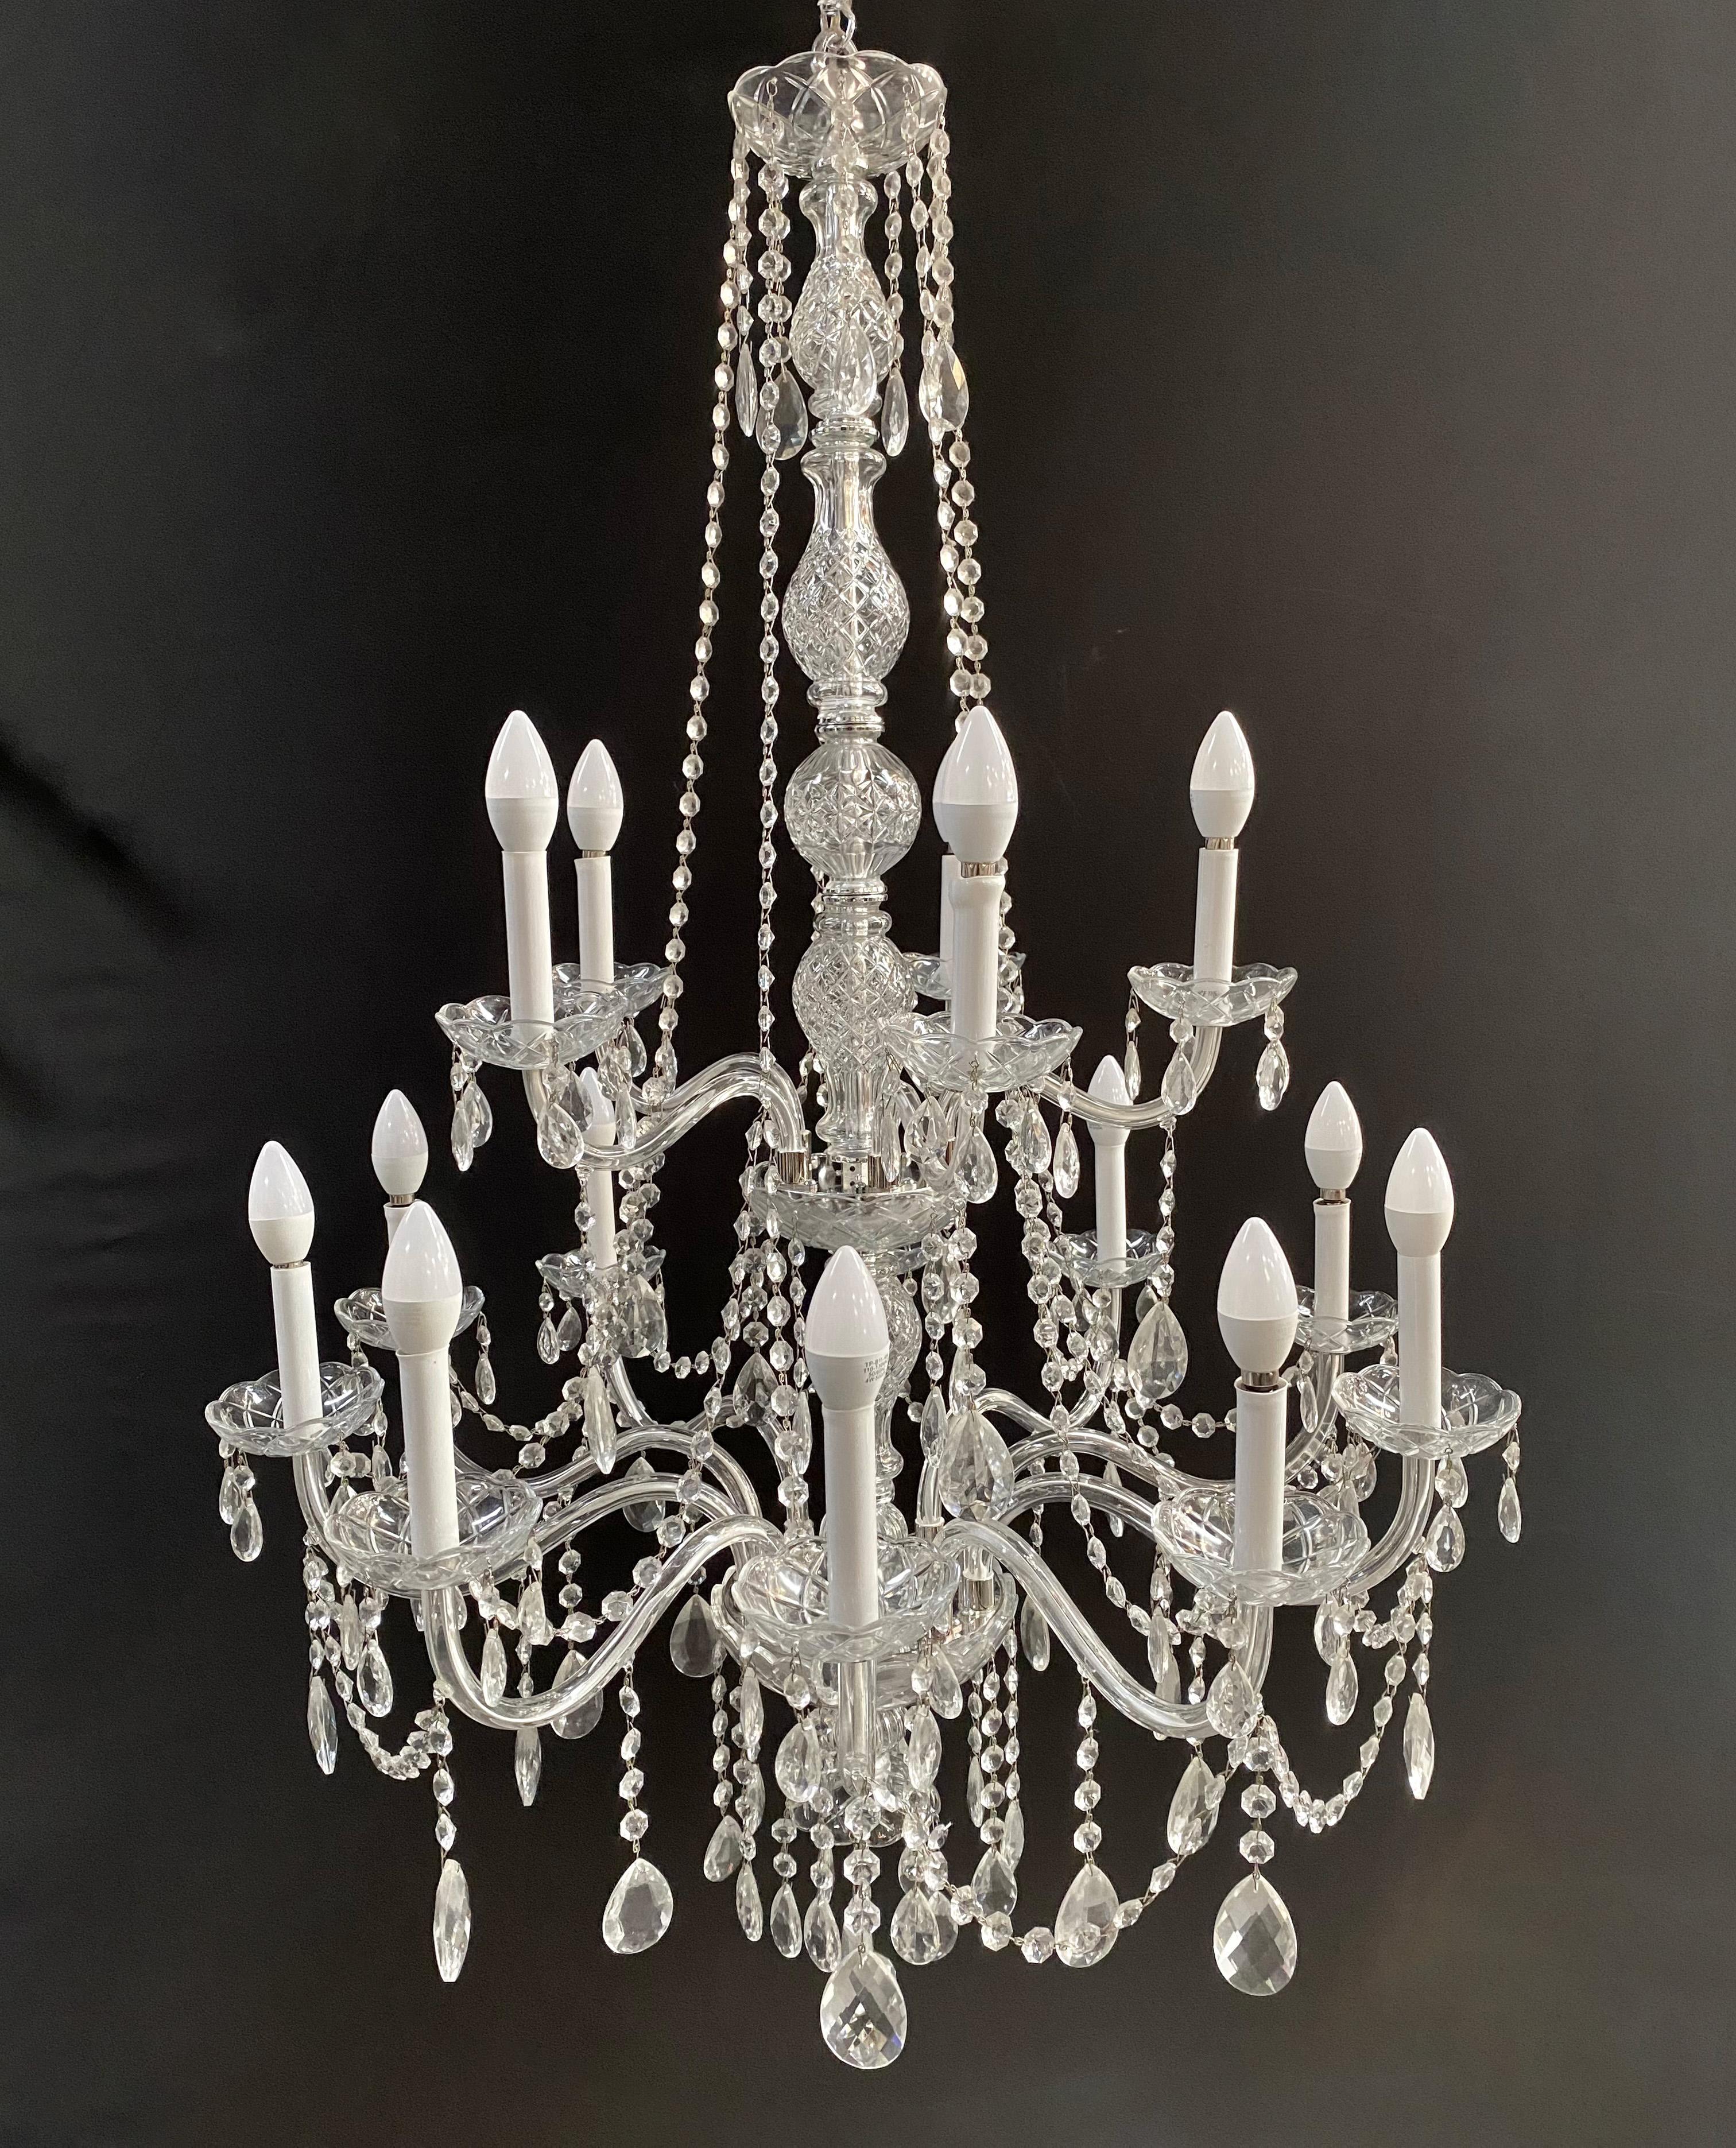 An  exquisite vintage Hollywood Regency style French crystal chandelier. Crafted with meticulous attention to detail, this opulent masterpiece exudes an aura of luxury and sophistication.

Featuring delicate glass arms, each adorned with cut glass